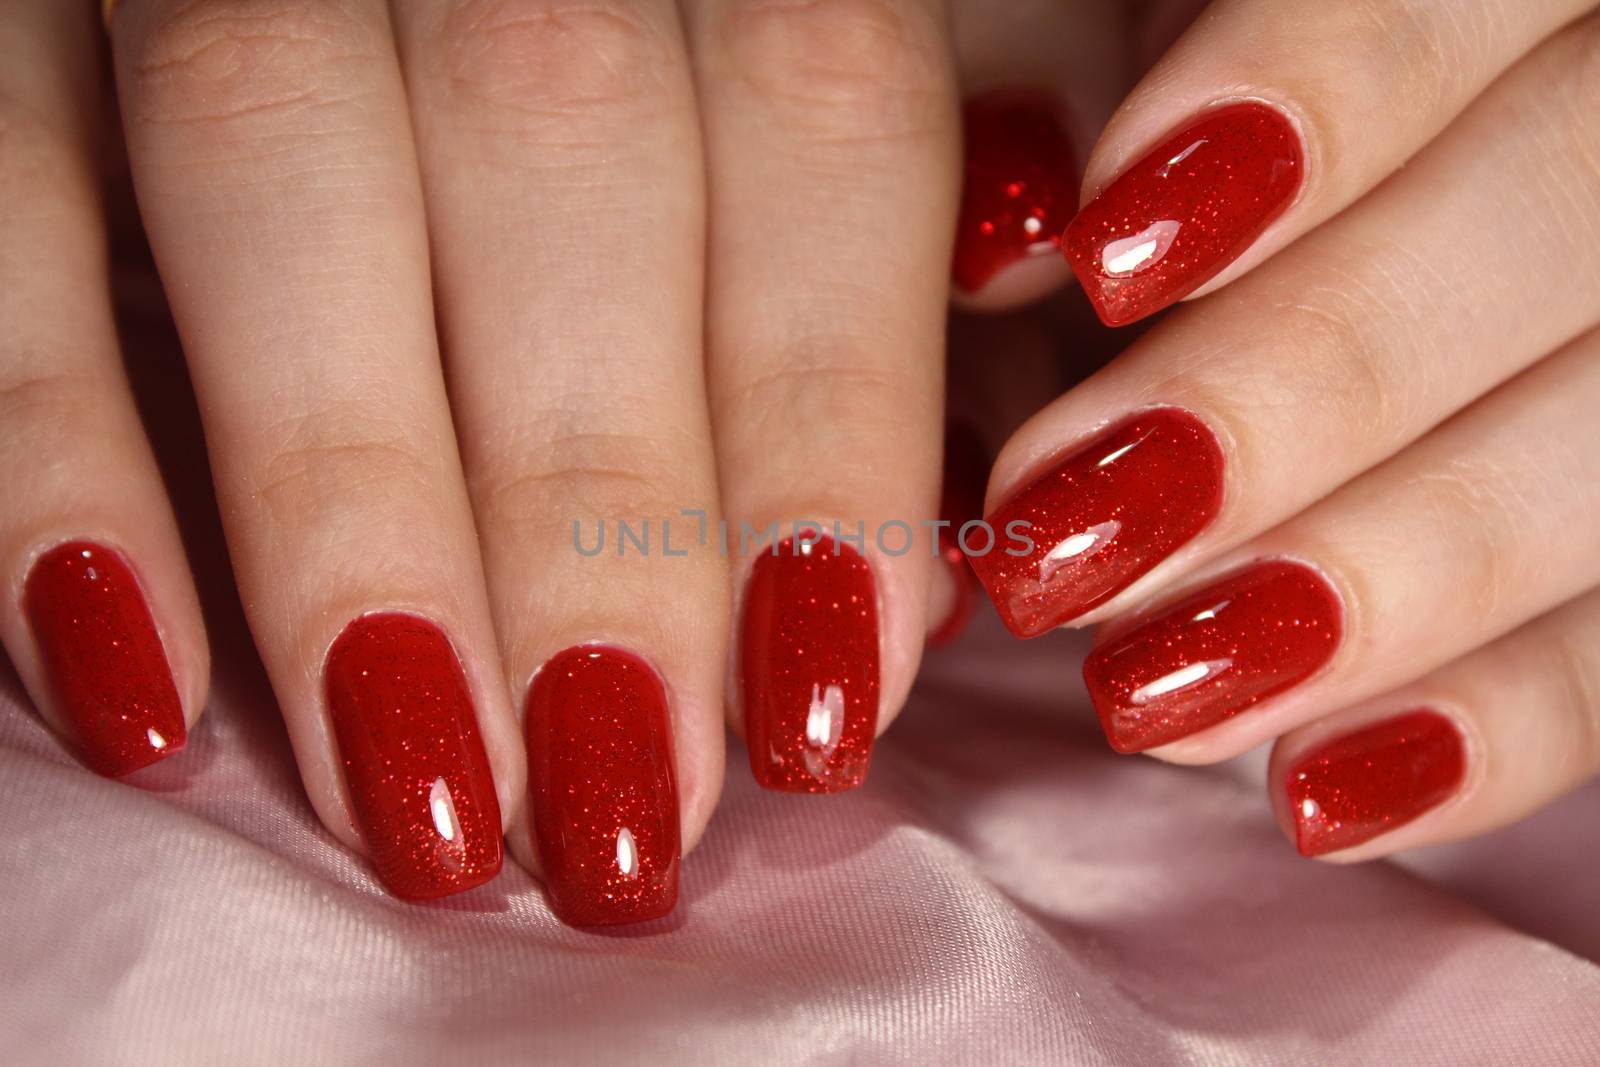 Bright red manicure design with gel varnish